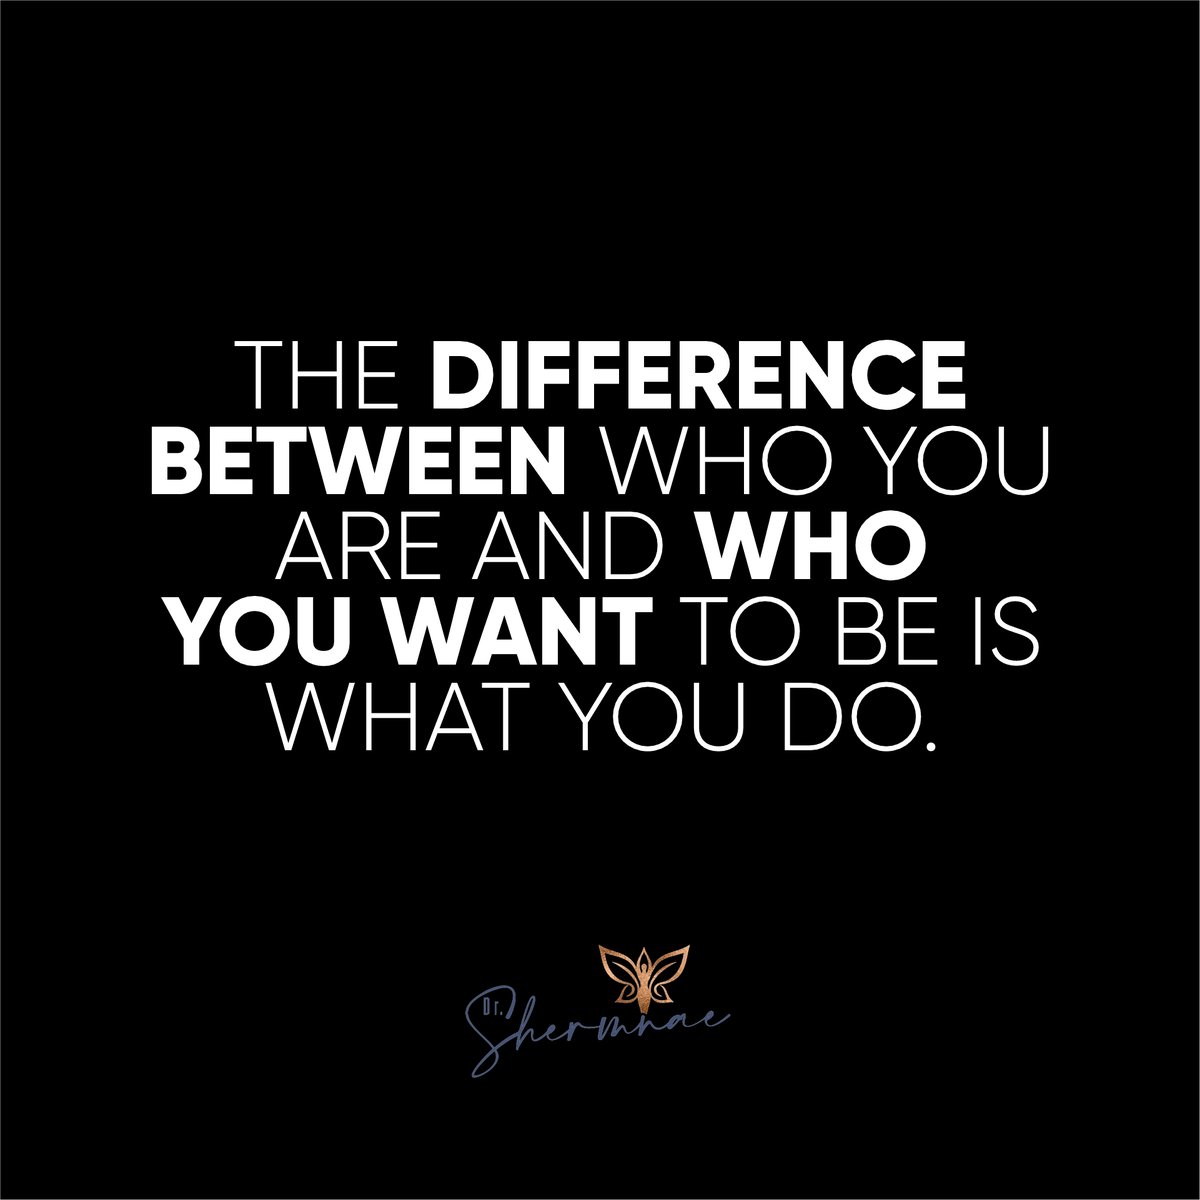 The difference between who you are and who you want to be is what you do.

#drshermnae #personalcoach #success #business #inspiration #selflove #alignment #transformation #meditation #empaths #selfempowerment #vulnerability #intuition #higherself #intuitive #consciousness